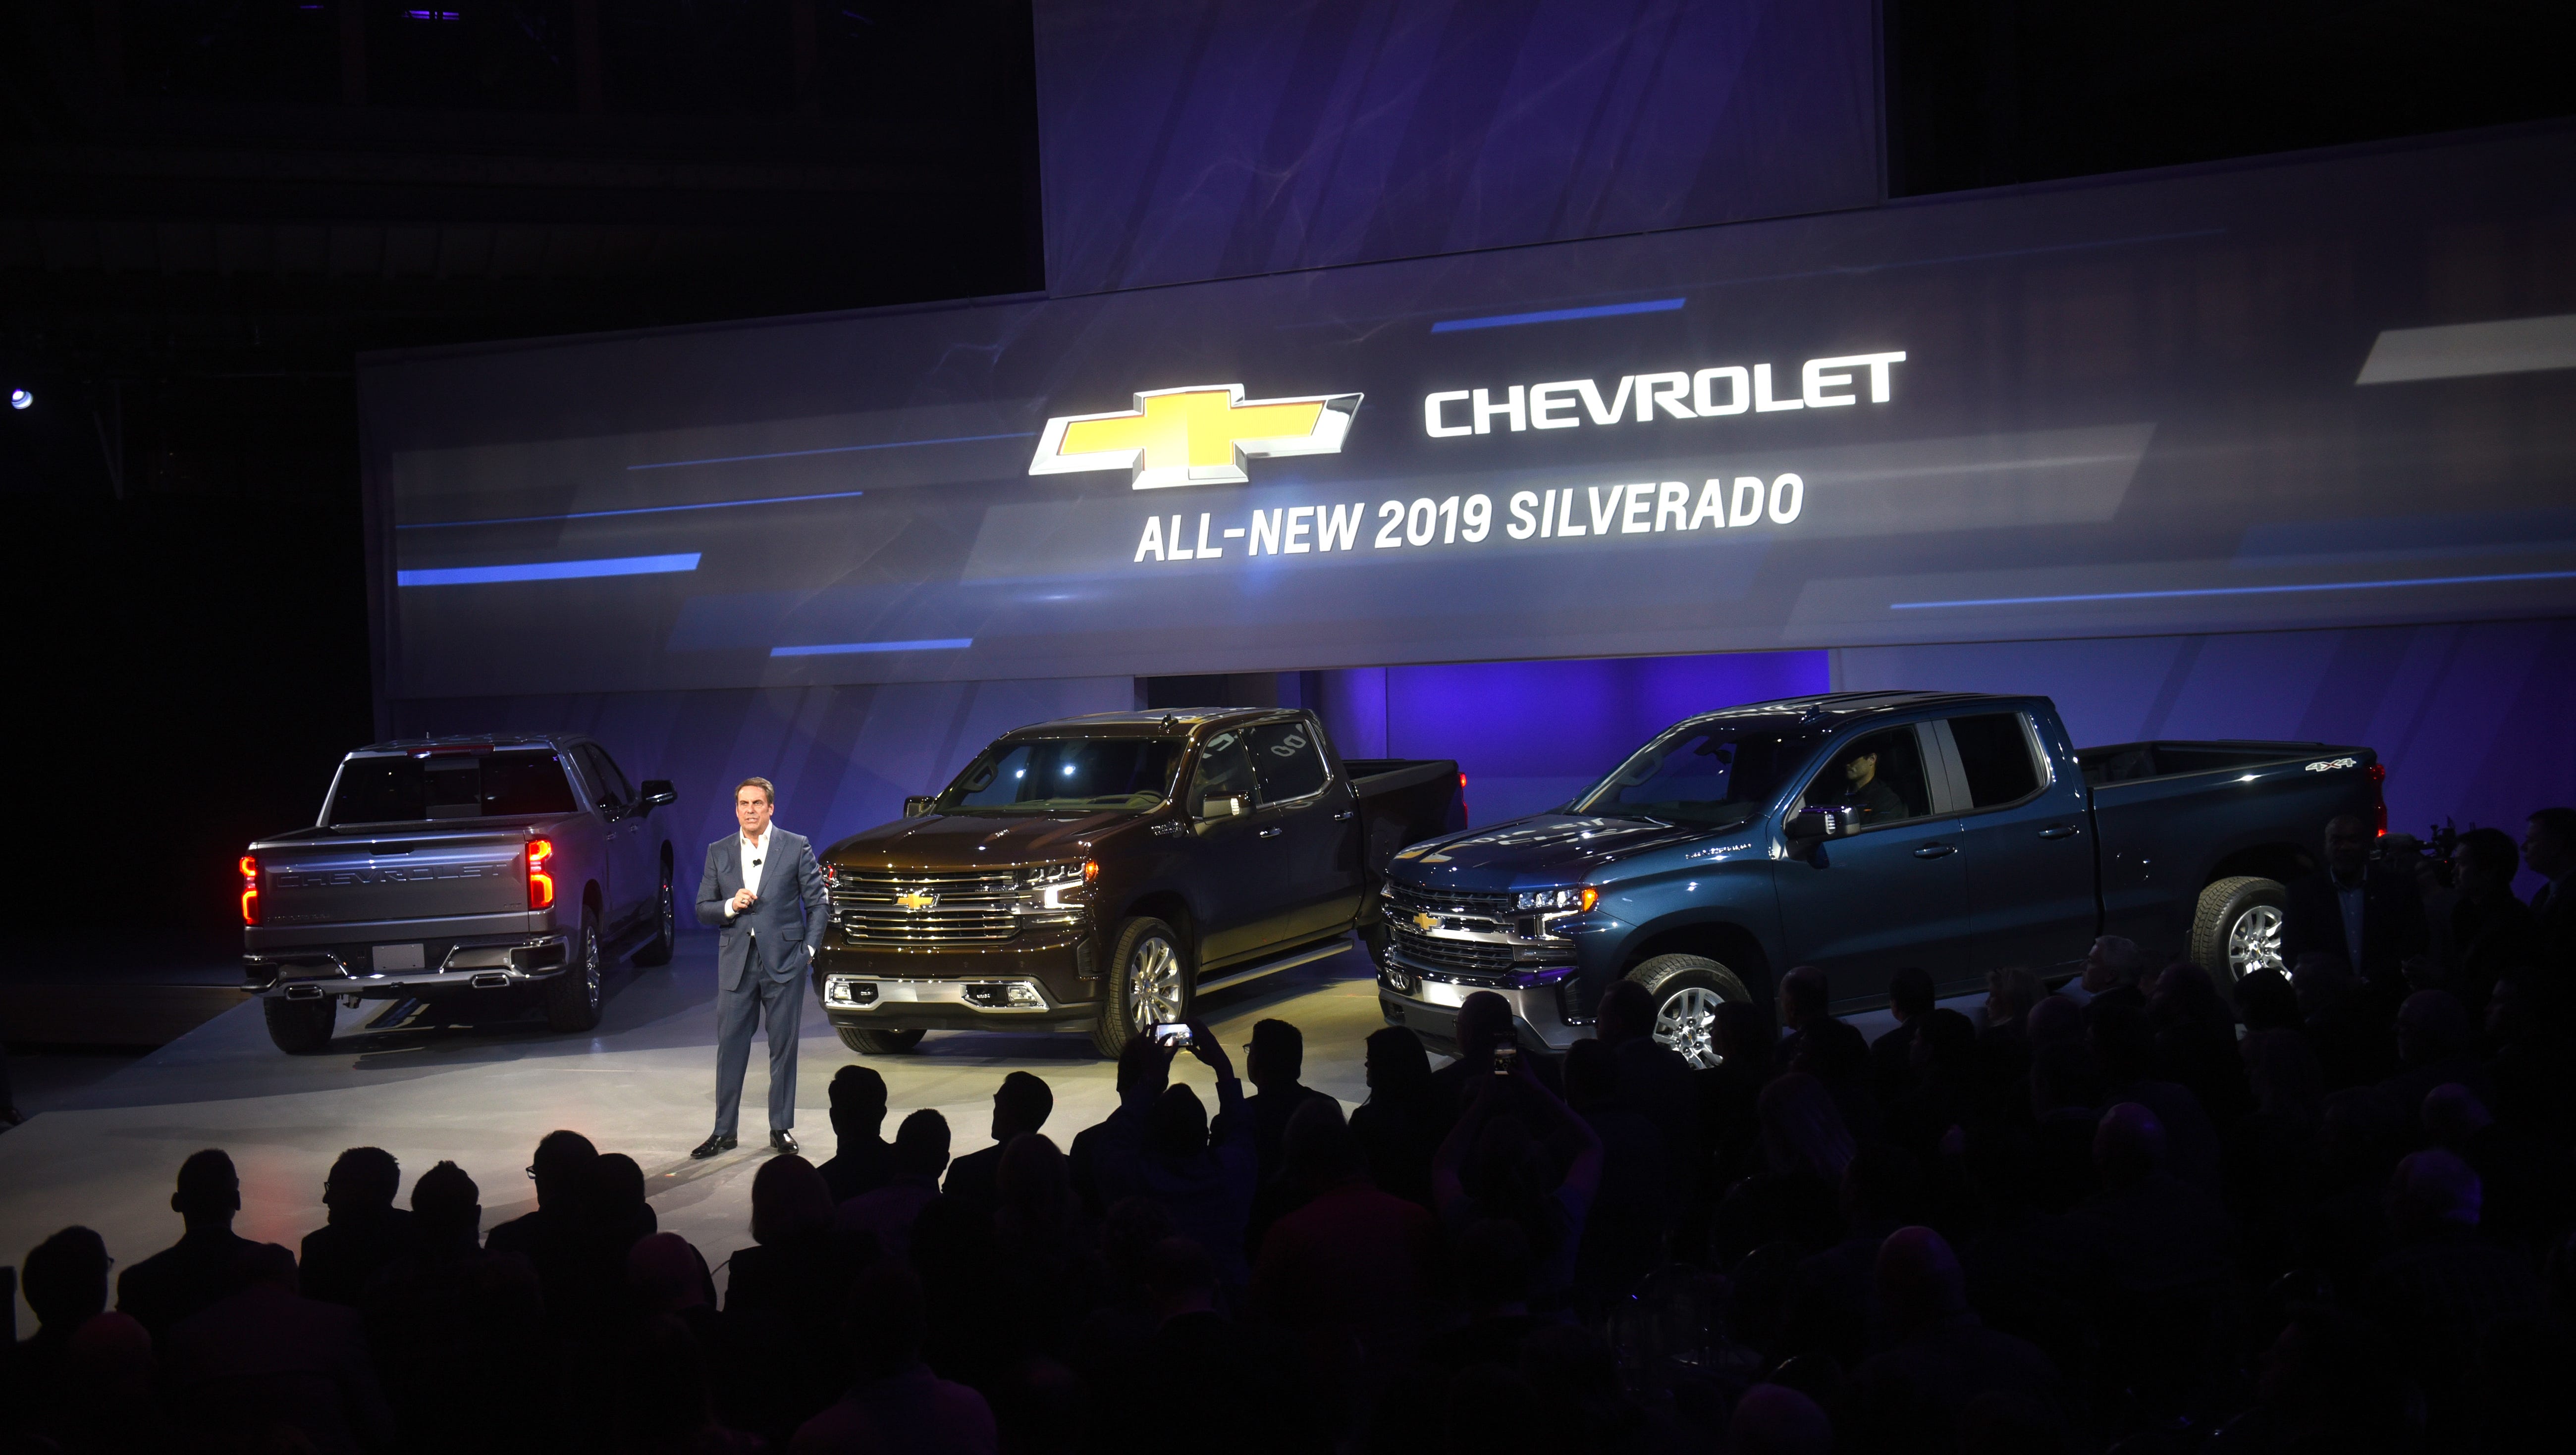 Mark Reuss, Executive VP Global Product Development, GM, introduced the 2019 Chevy Silverado at Eastern Market.